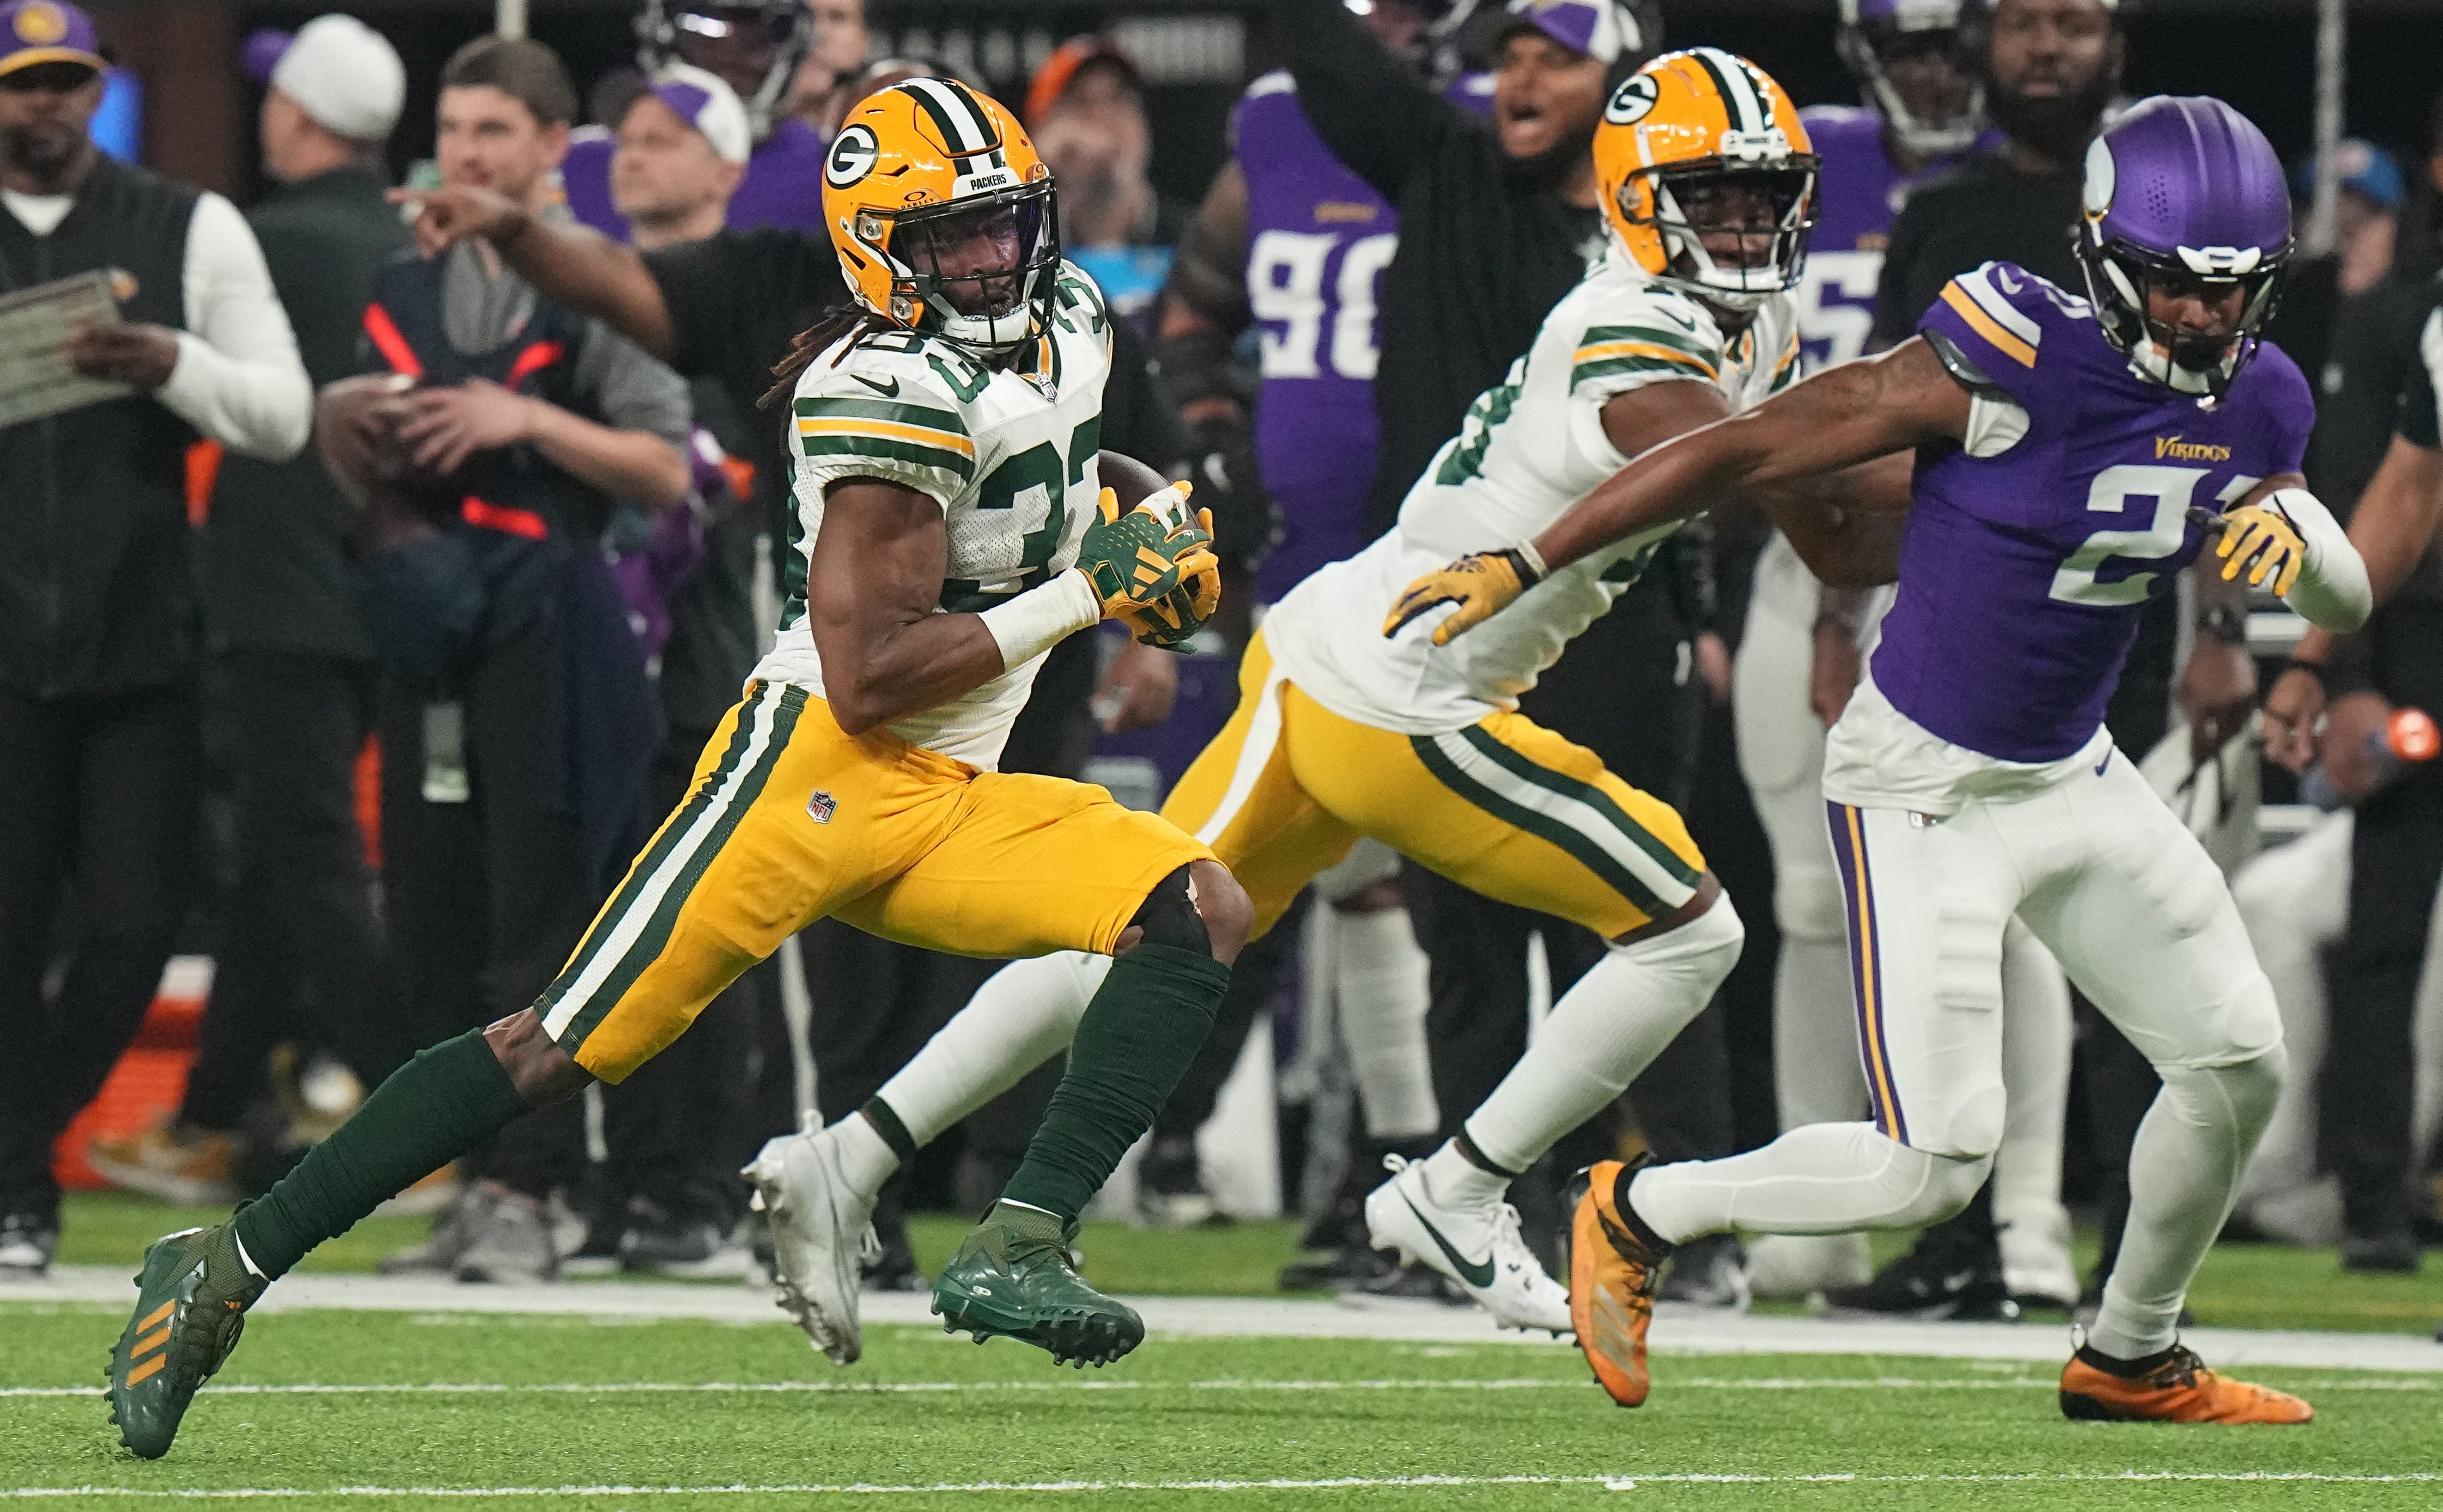 Green Bay Packers running back Aaron Jones (33) picks up 19y and on a run during the first quarter of their game Sunday, December 31, 2023 at U.S. Bank Stadium in Minneapolis, Minnesota. The Green Bay Packers beat the Minnesota Vikings 33-10.